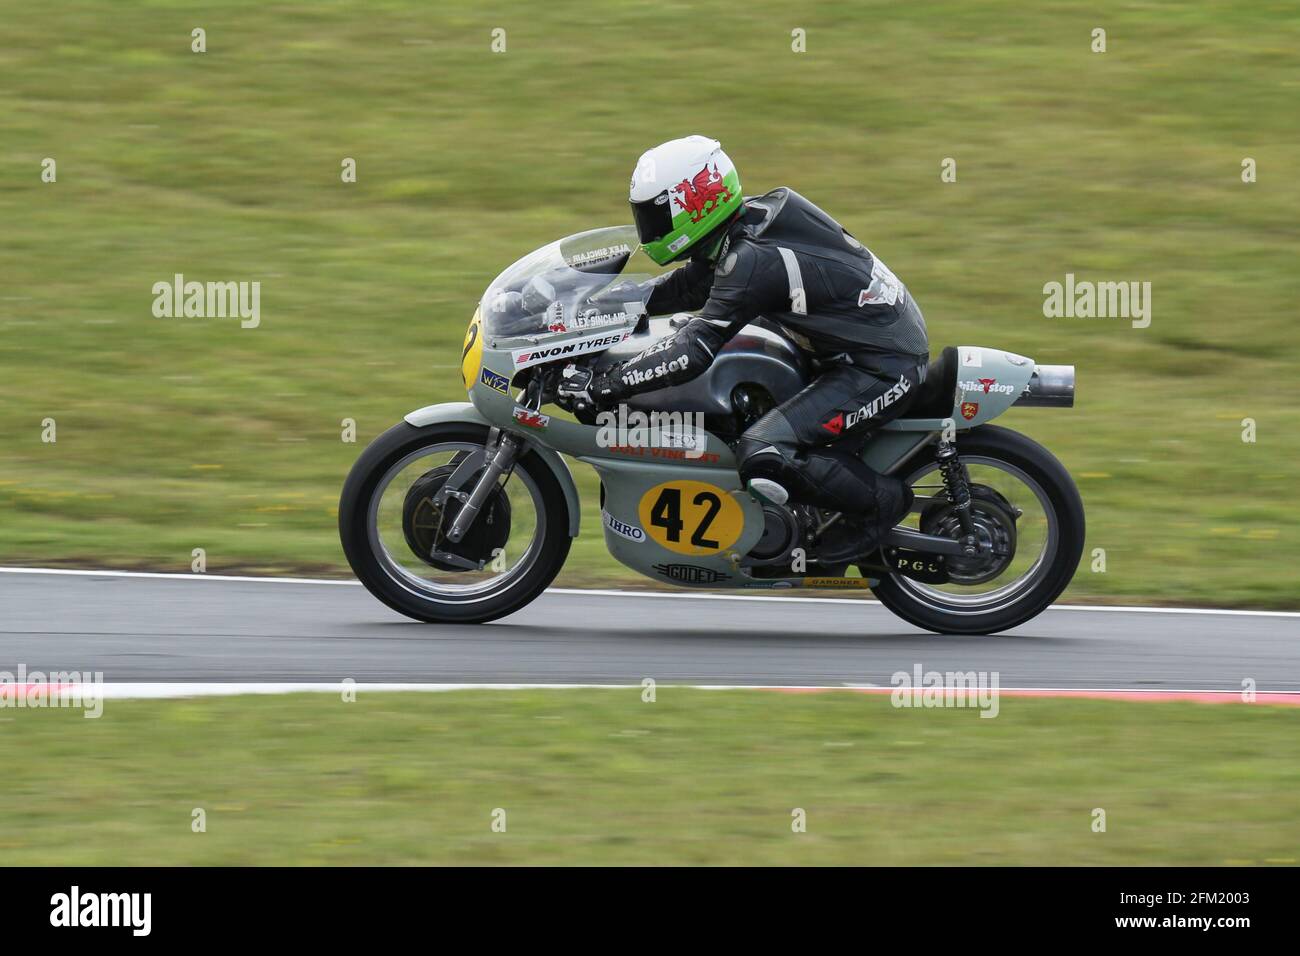 Alex Sinclair approaches The Gooseneck aboard a 500cc EGLI-Vincent during one of the IHRO races at the Cadwell Park International Classic 2015 Stock Photo